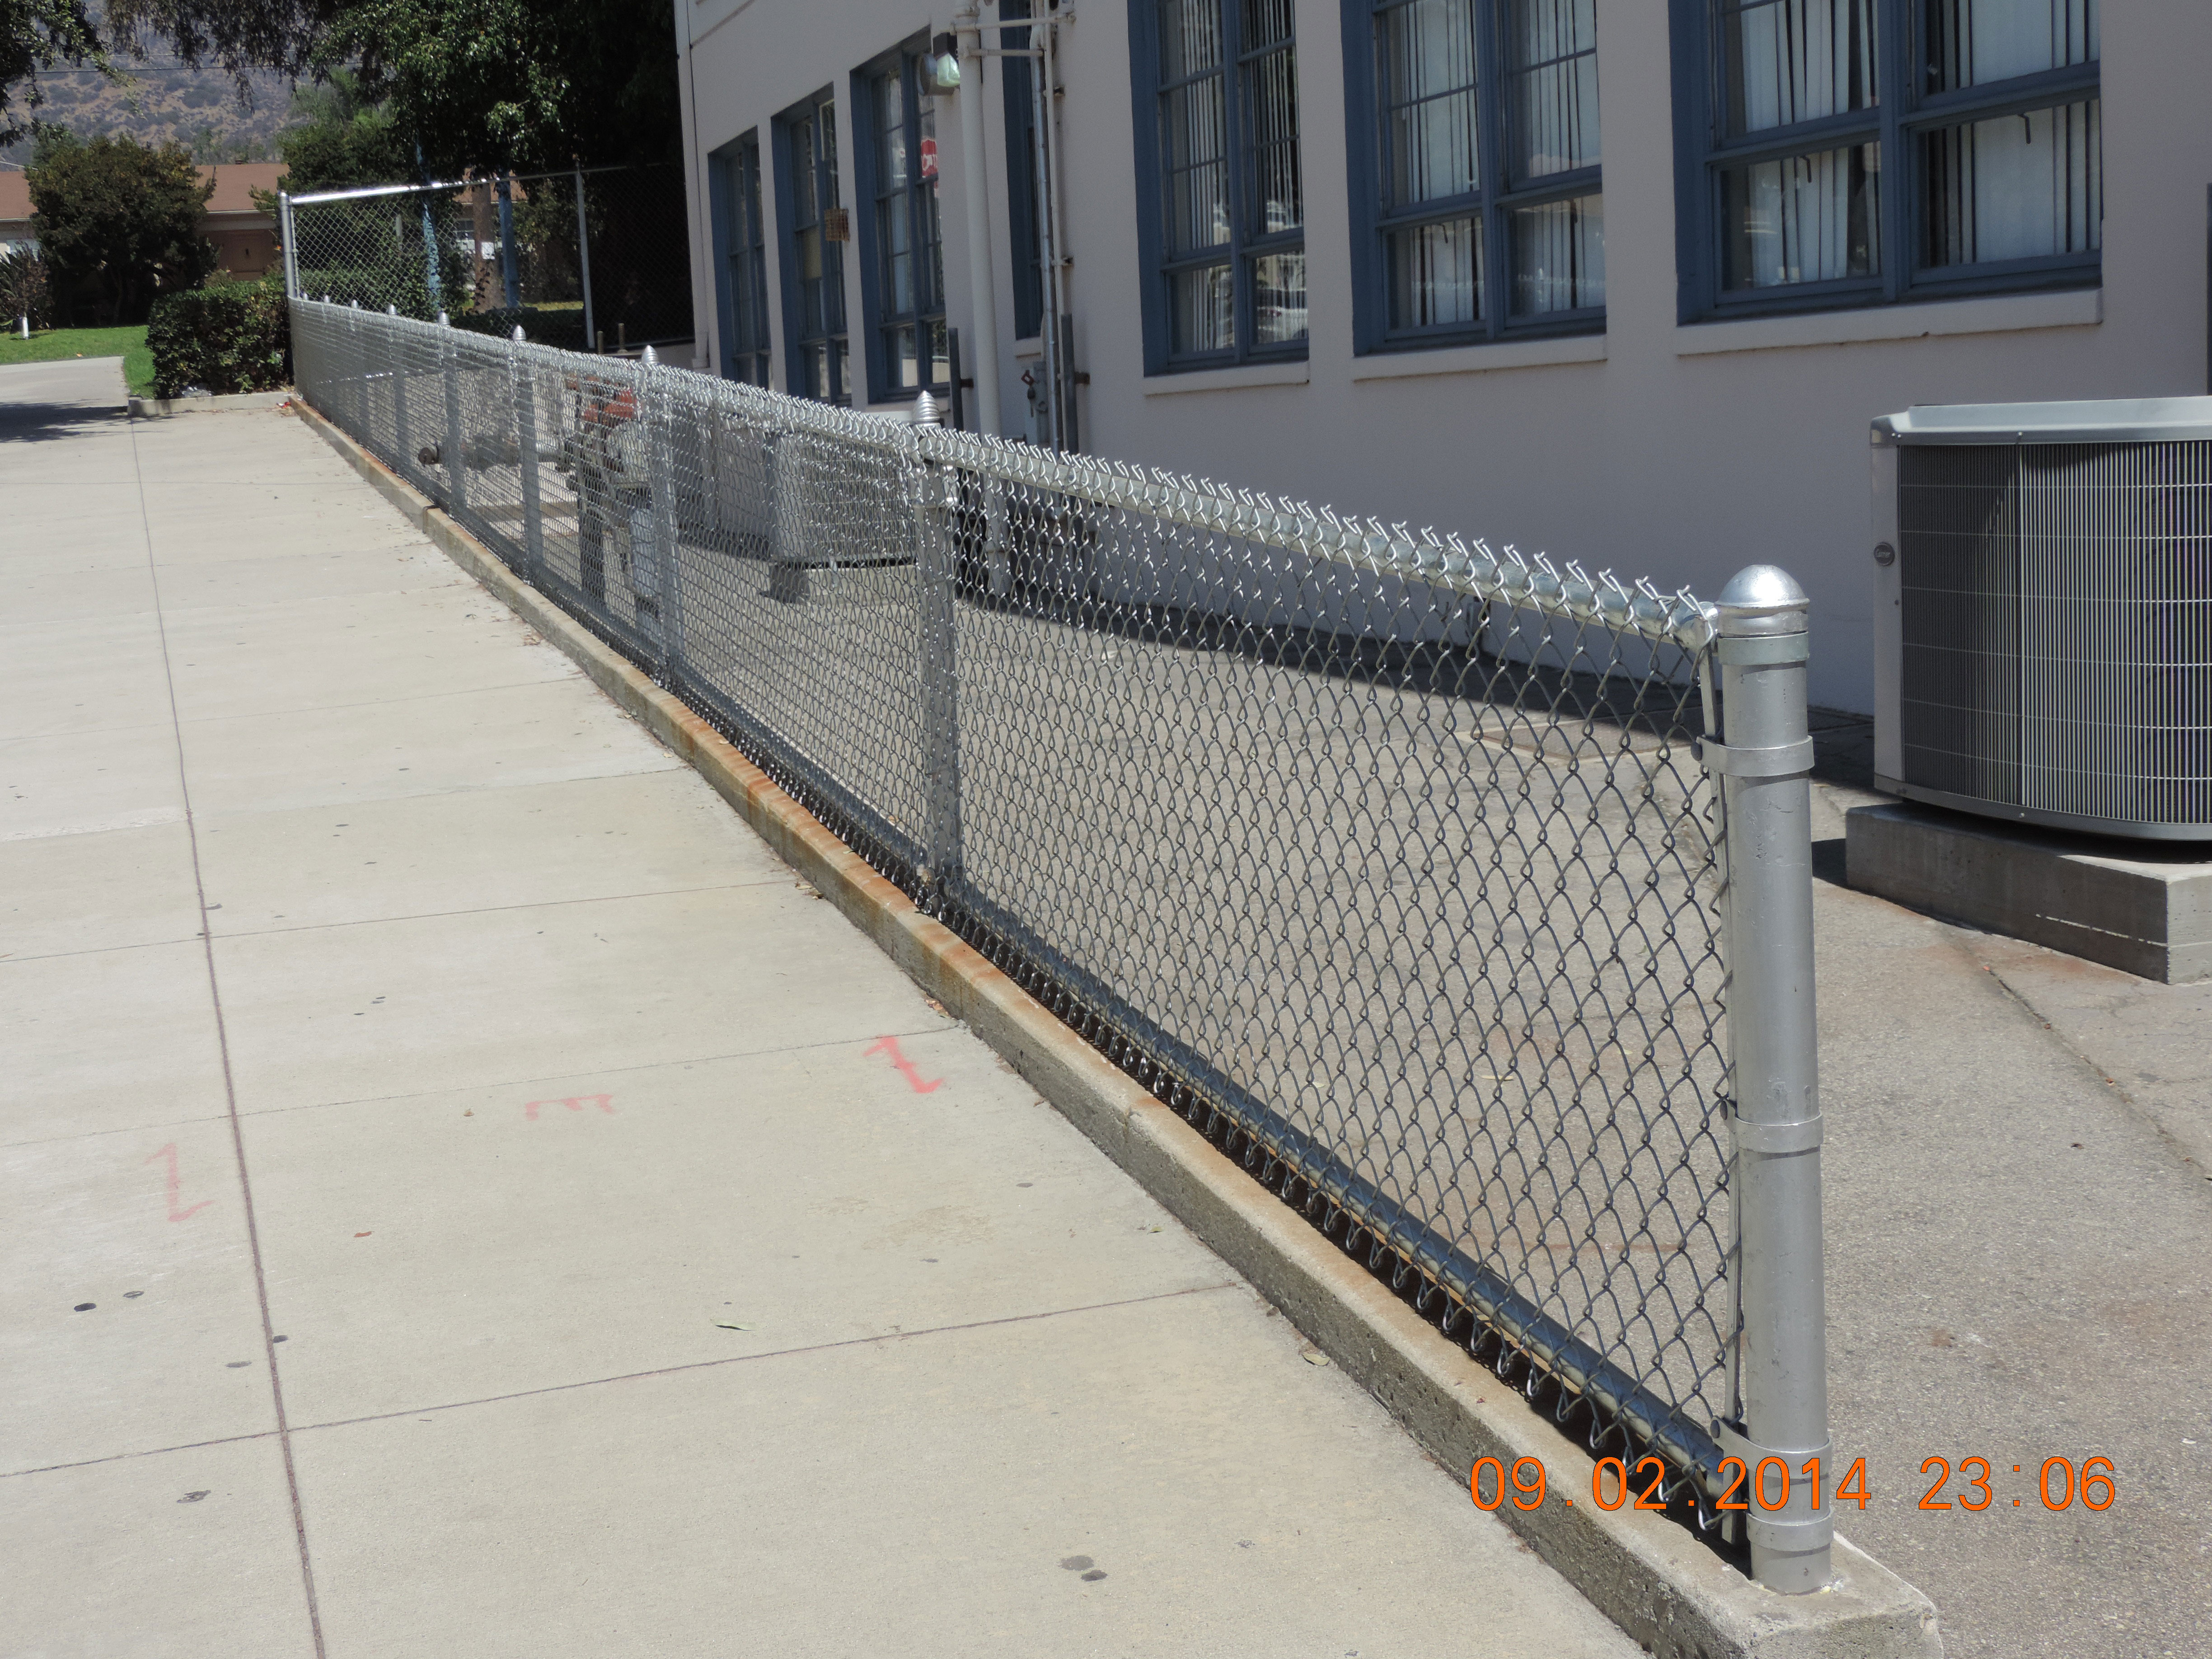 3-Foot-High Chain-Link Fence